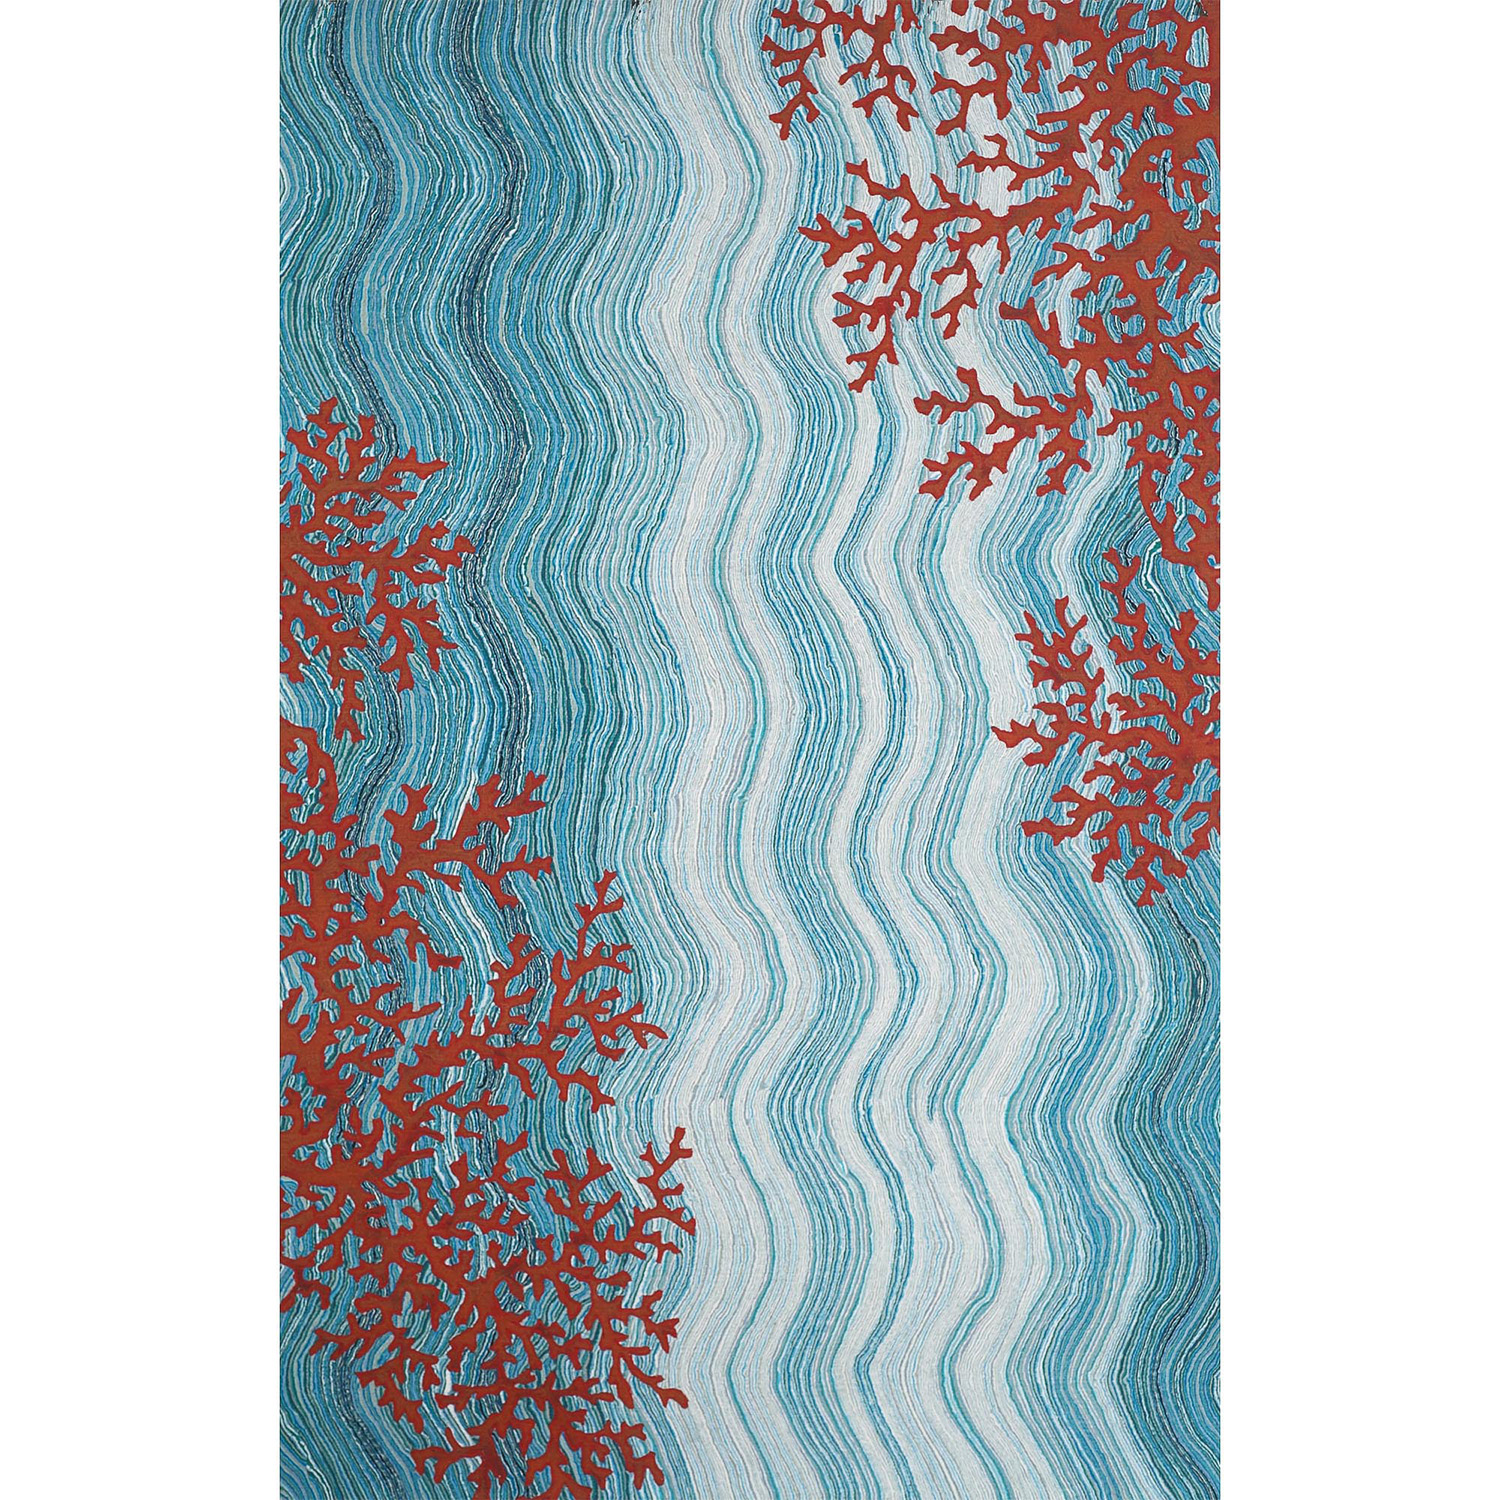 Liora Manne Visions IV  Rug-Whimsical, Coral Reef Water  Product Image